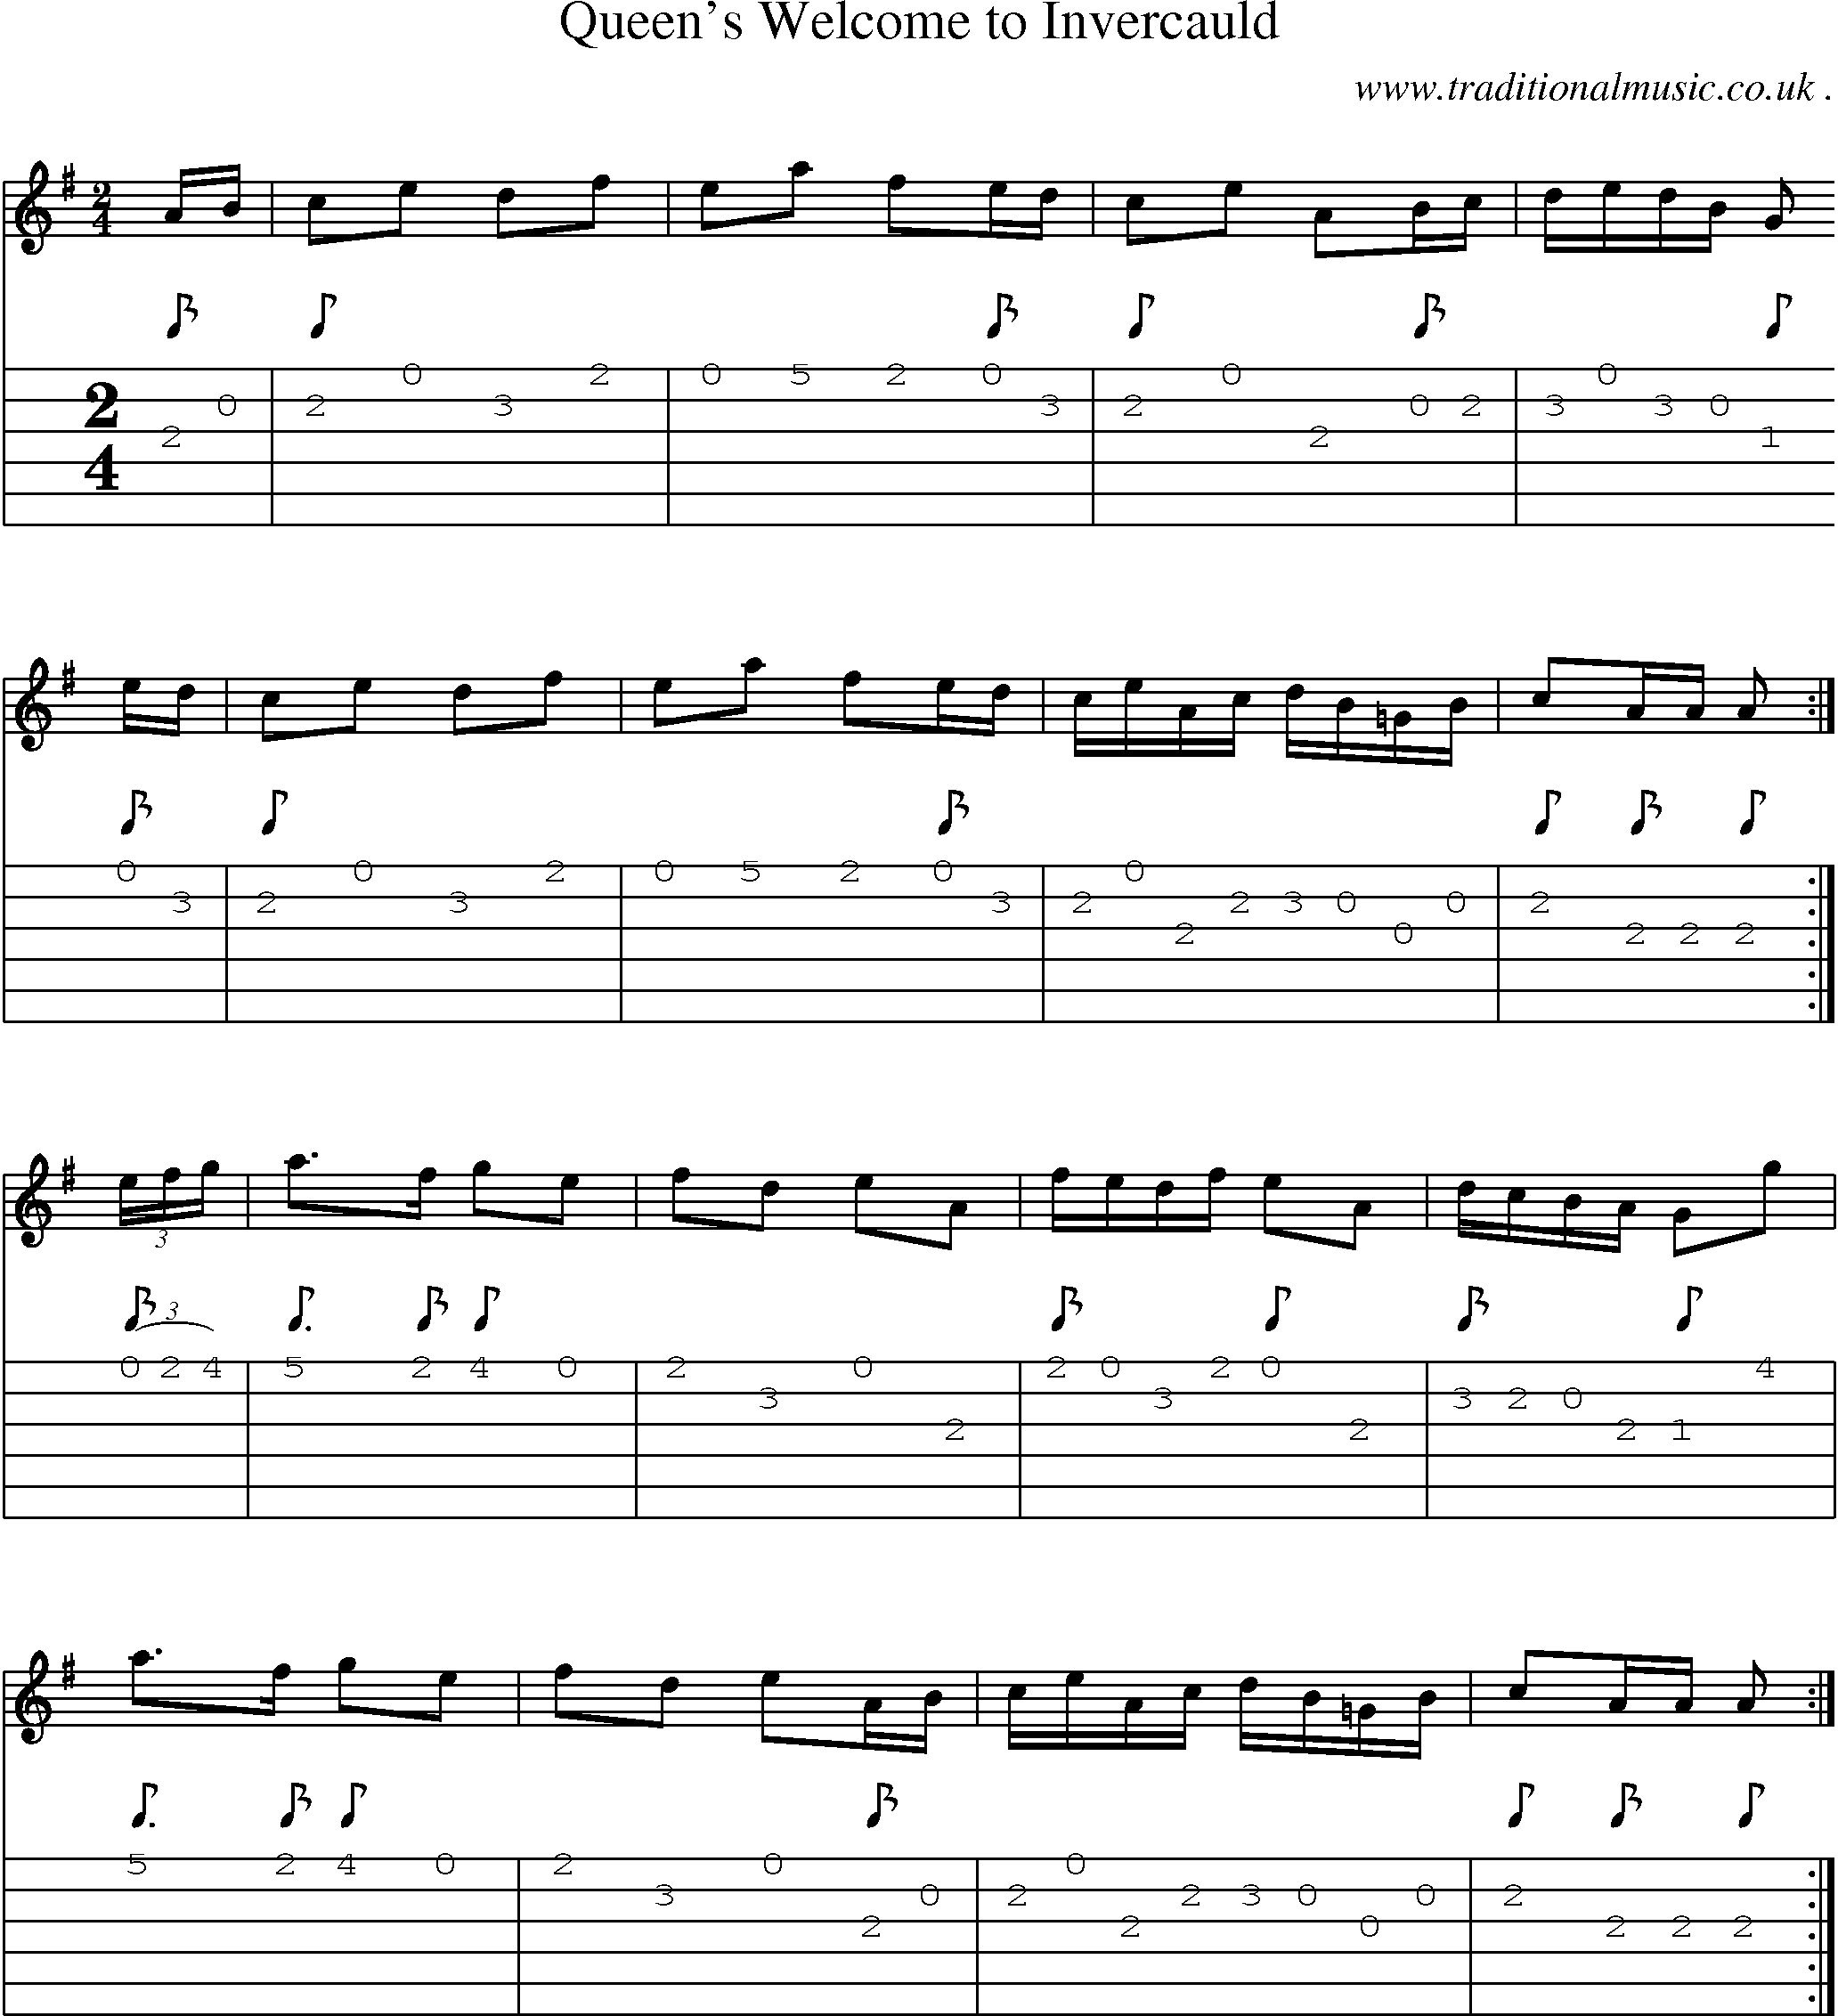 Sheet-music  score, Chords and Guitar Tabs for Queens Welcome To Invercauld